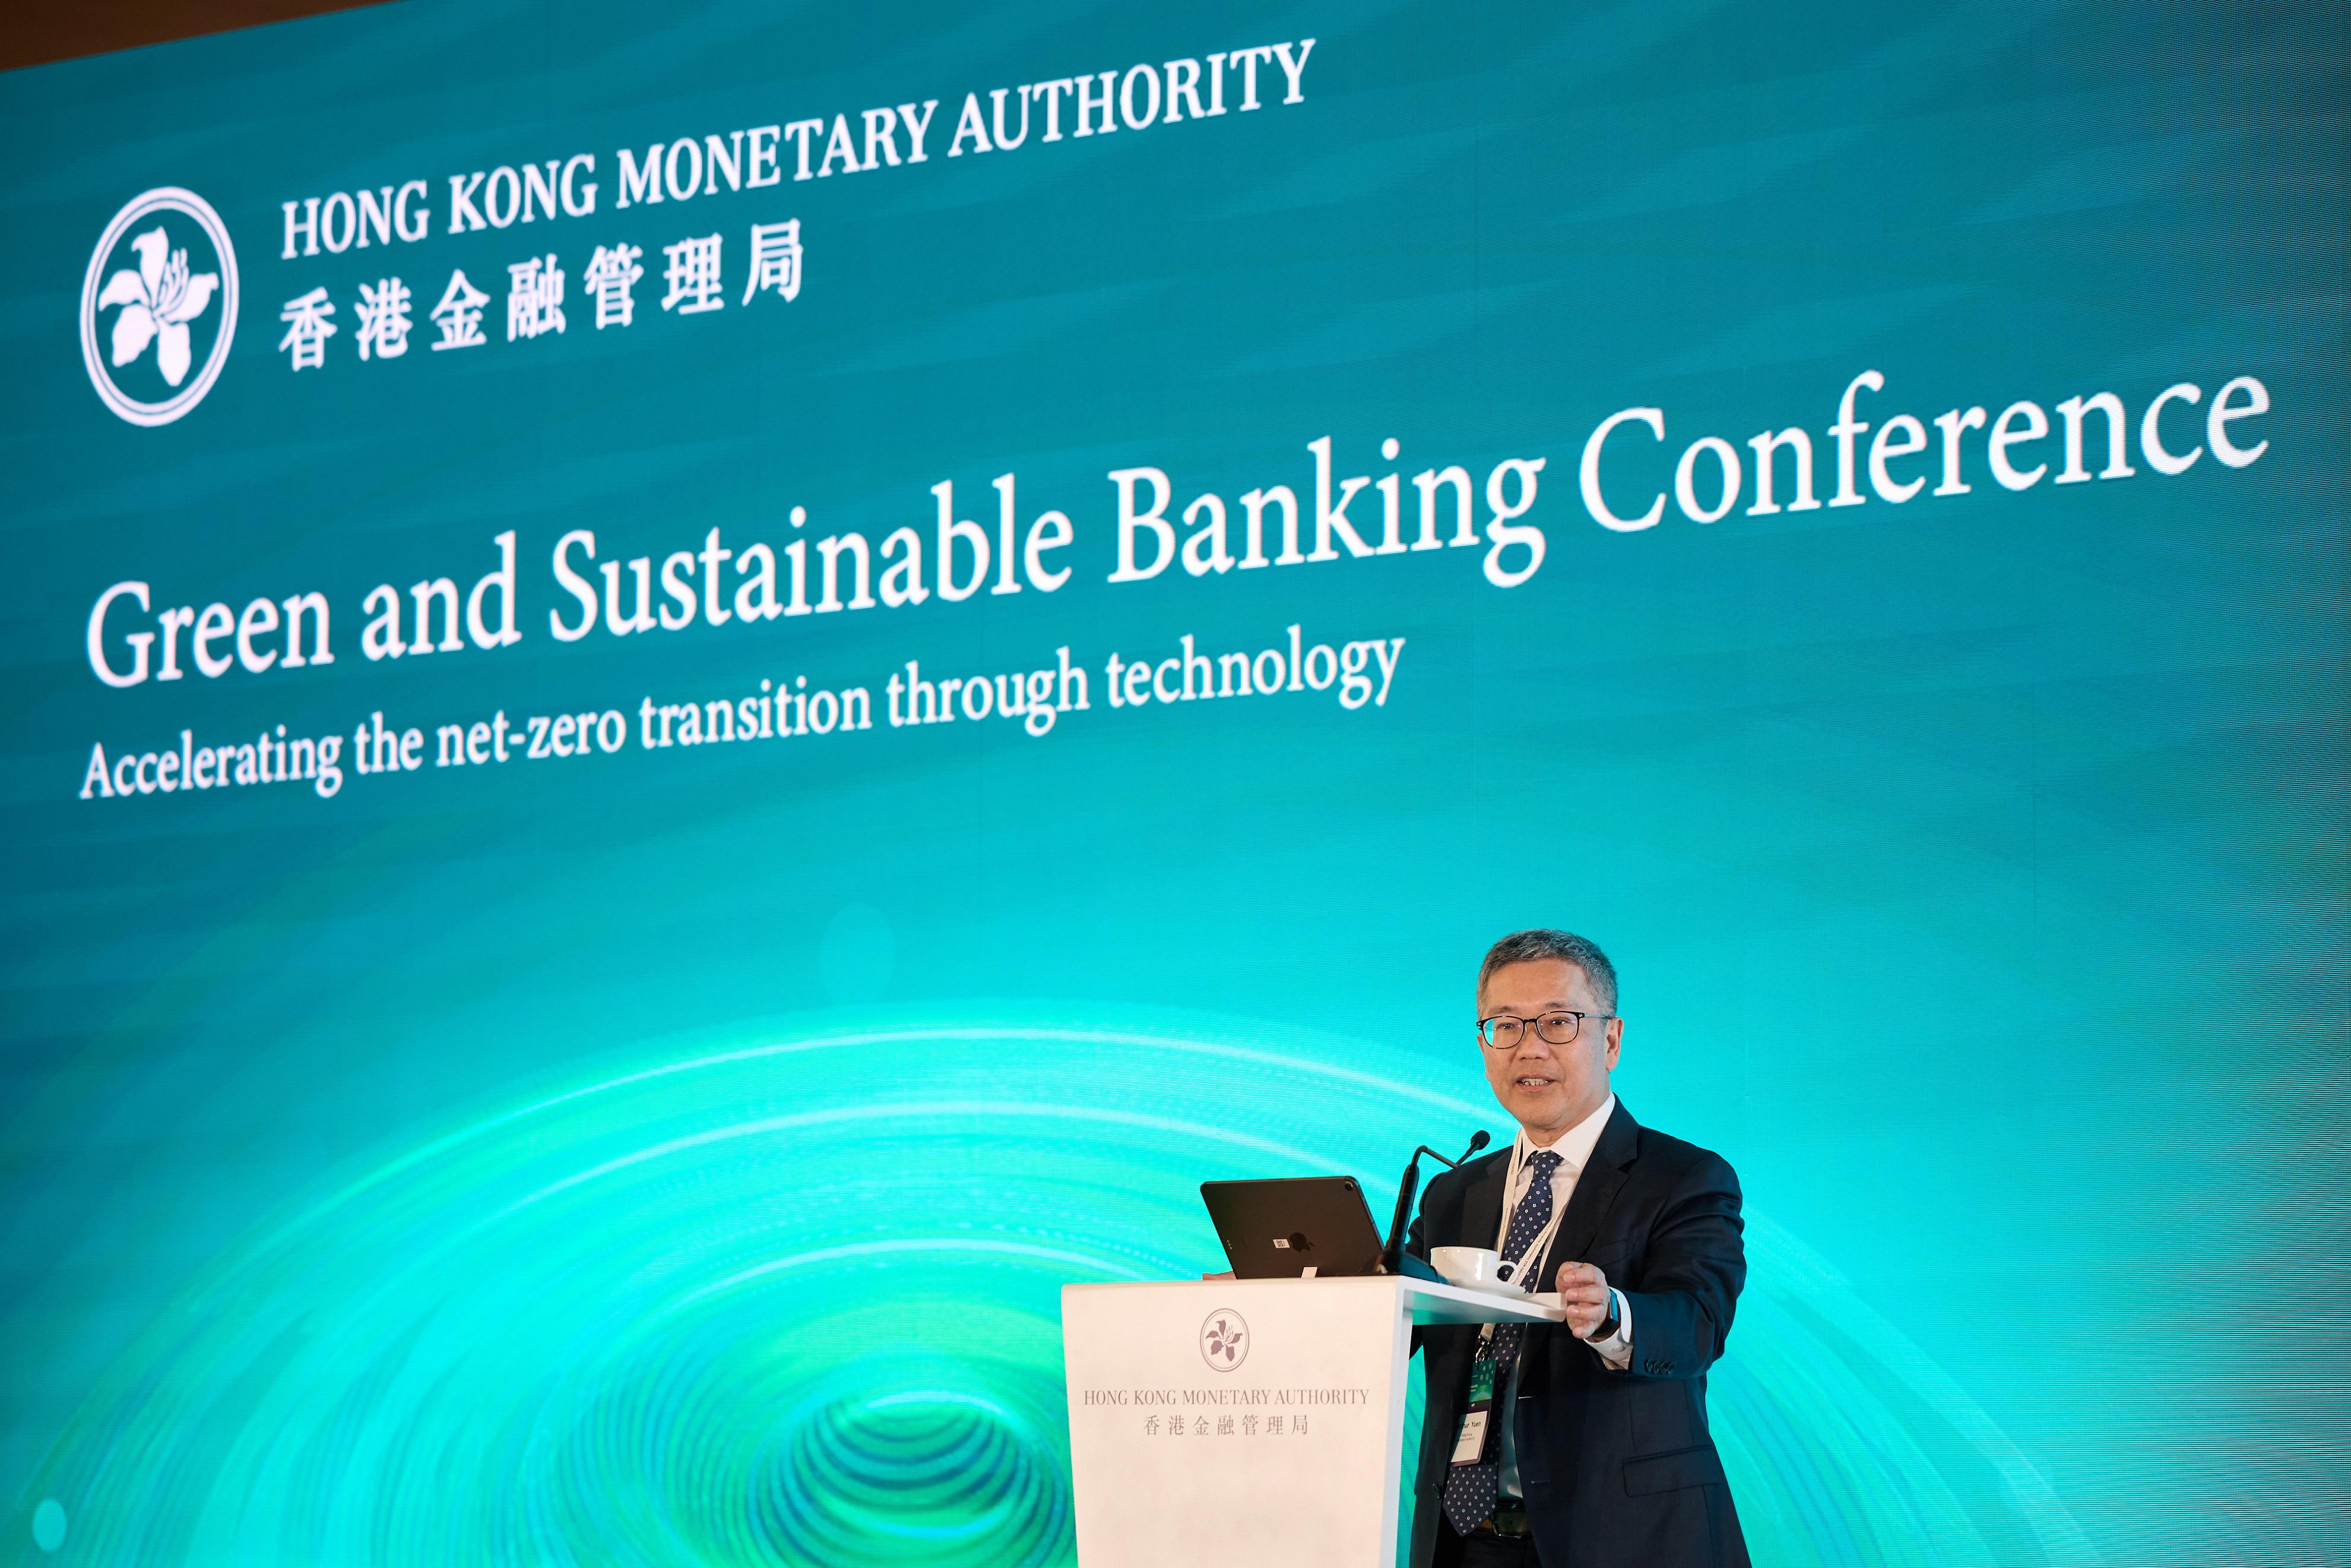 The Hong Kong Monetary Authority (HKMA) organised the Green and Sustainable Banking Conference today (December 11). Deputy Chief Executive of the HKMA Mr Arthur Yuen delivers opening remarks at the Green and Sustainable Banking Conference.